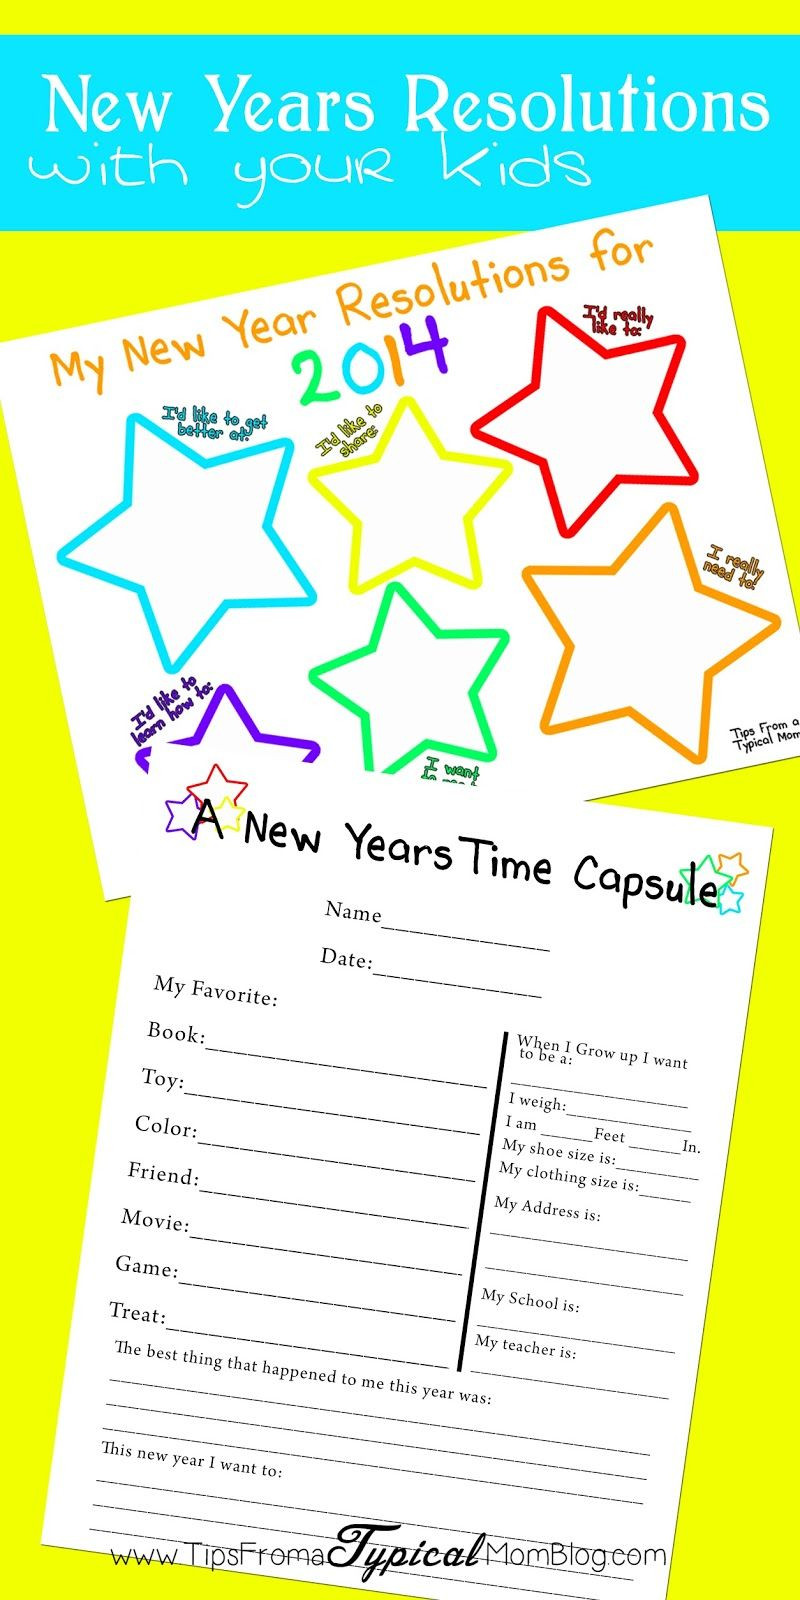 New Year Resolution Ideas For Students
 Making New Years Resolutions with your Kids Free